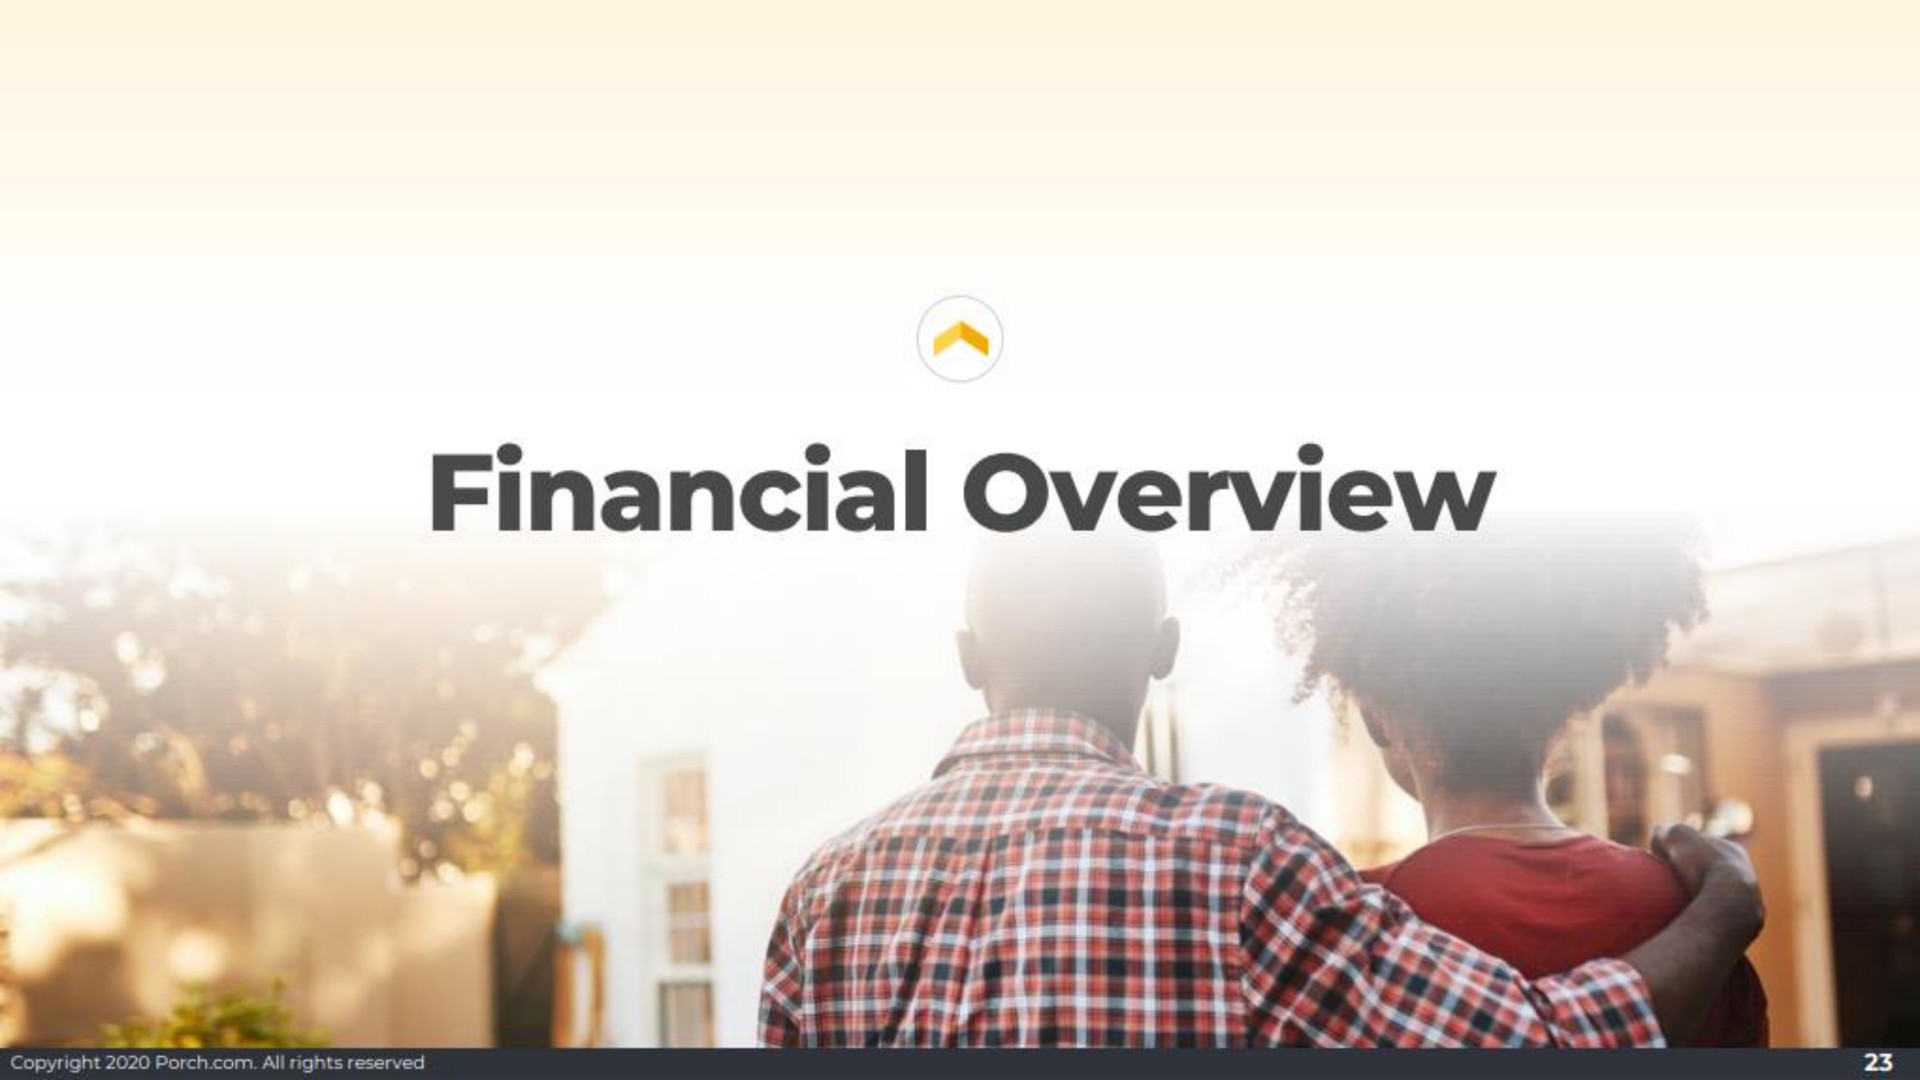 financial overview | Porch